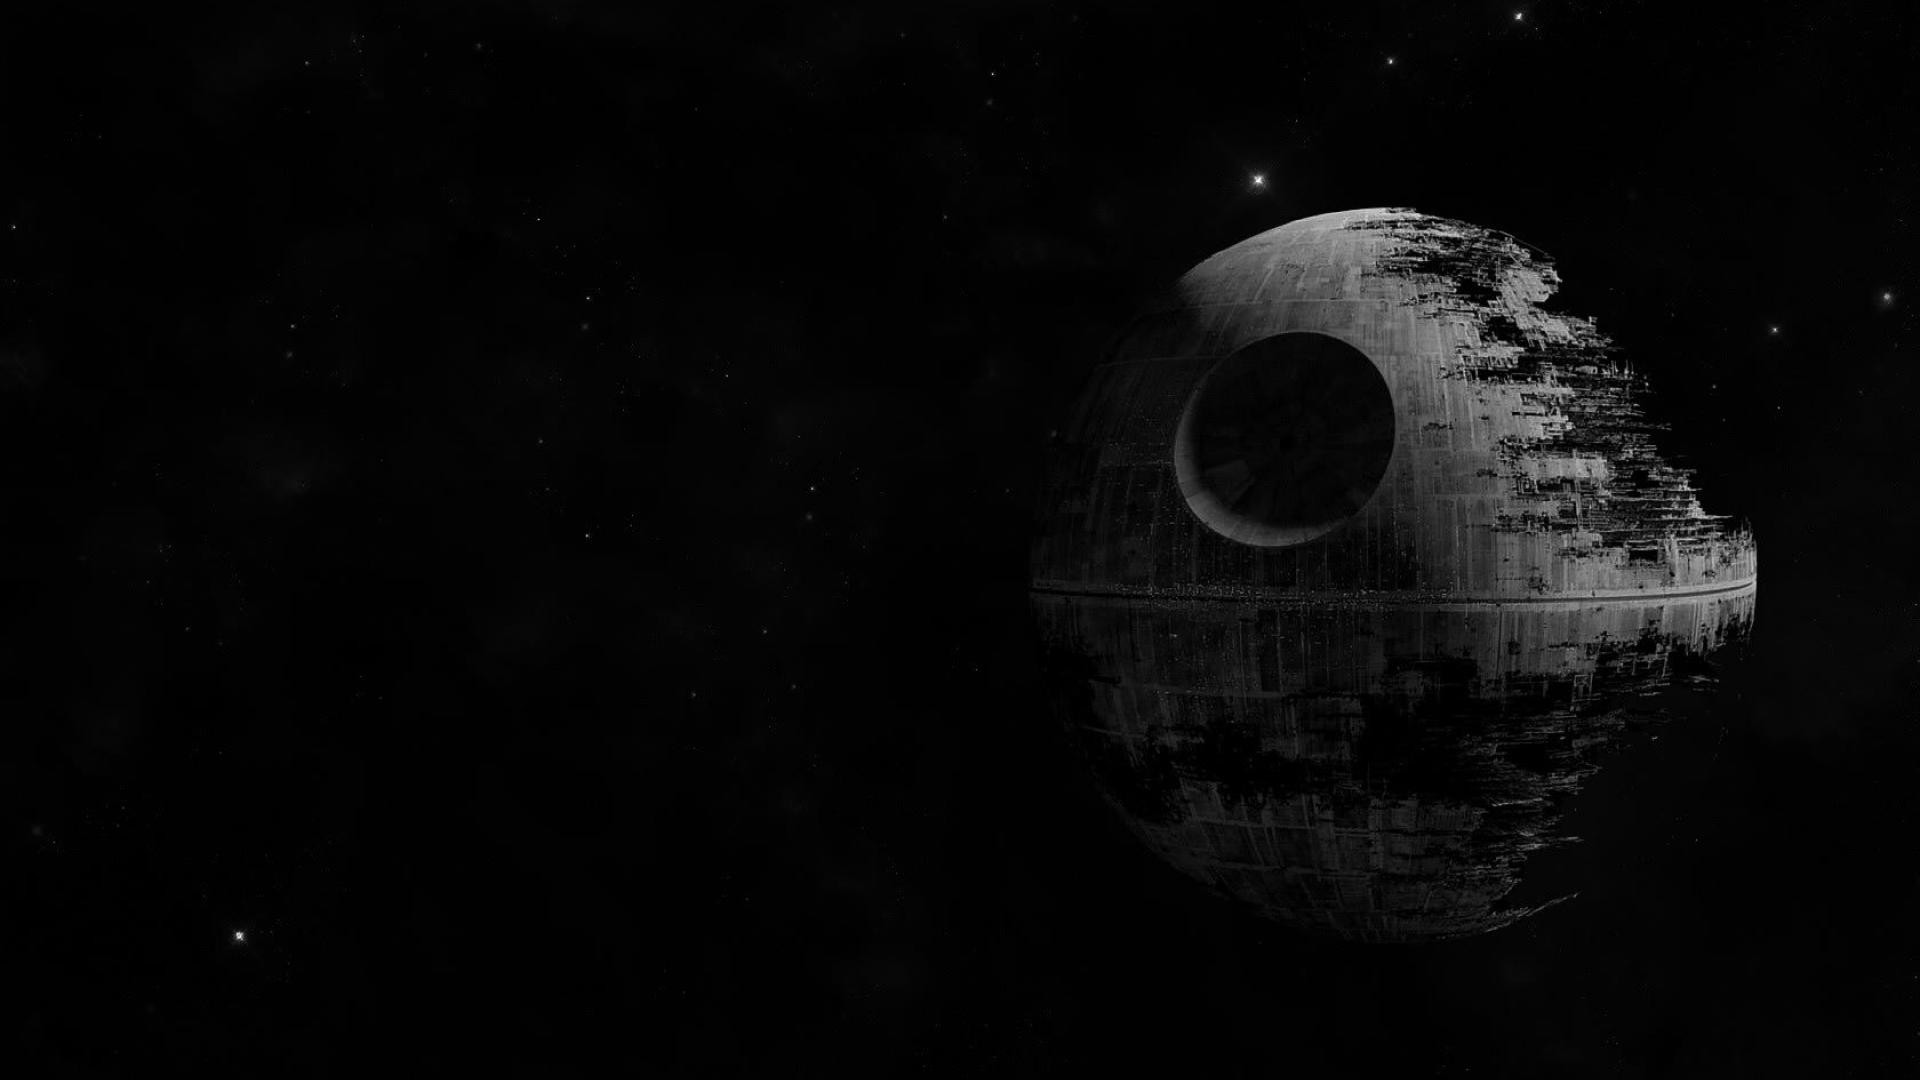 star wars wallpaper 1920x1080,outer space,monochrome,astronomical object,atmosphere,sky